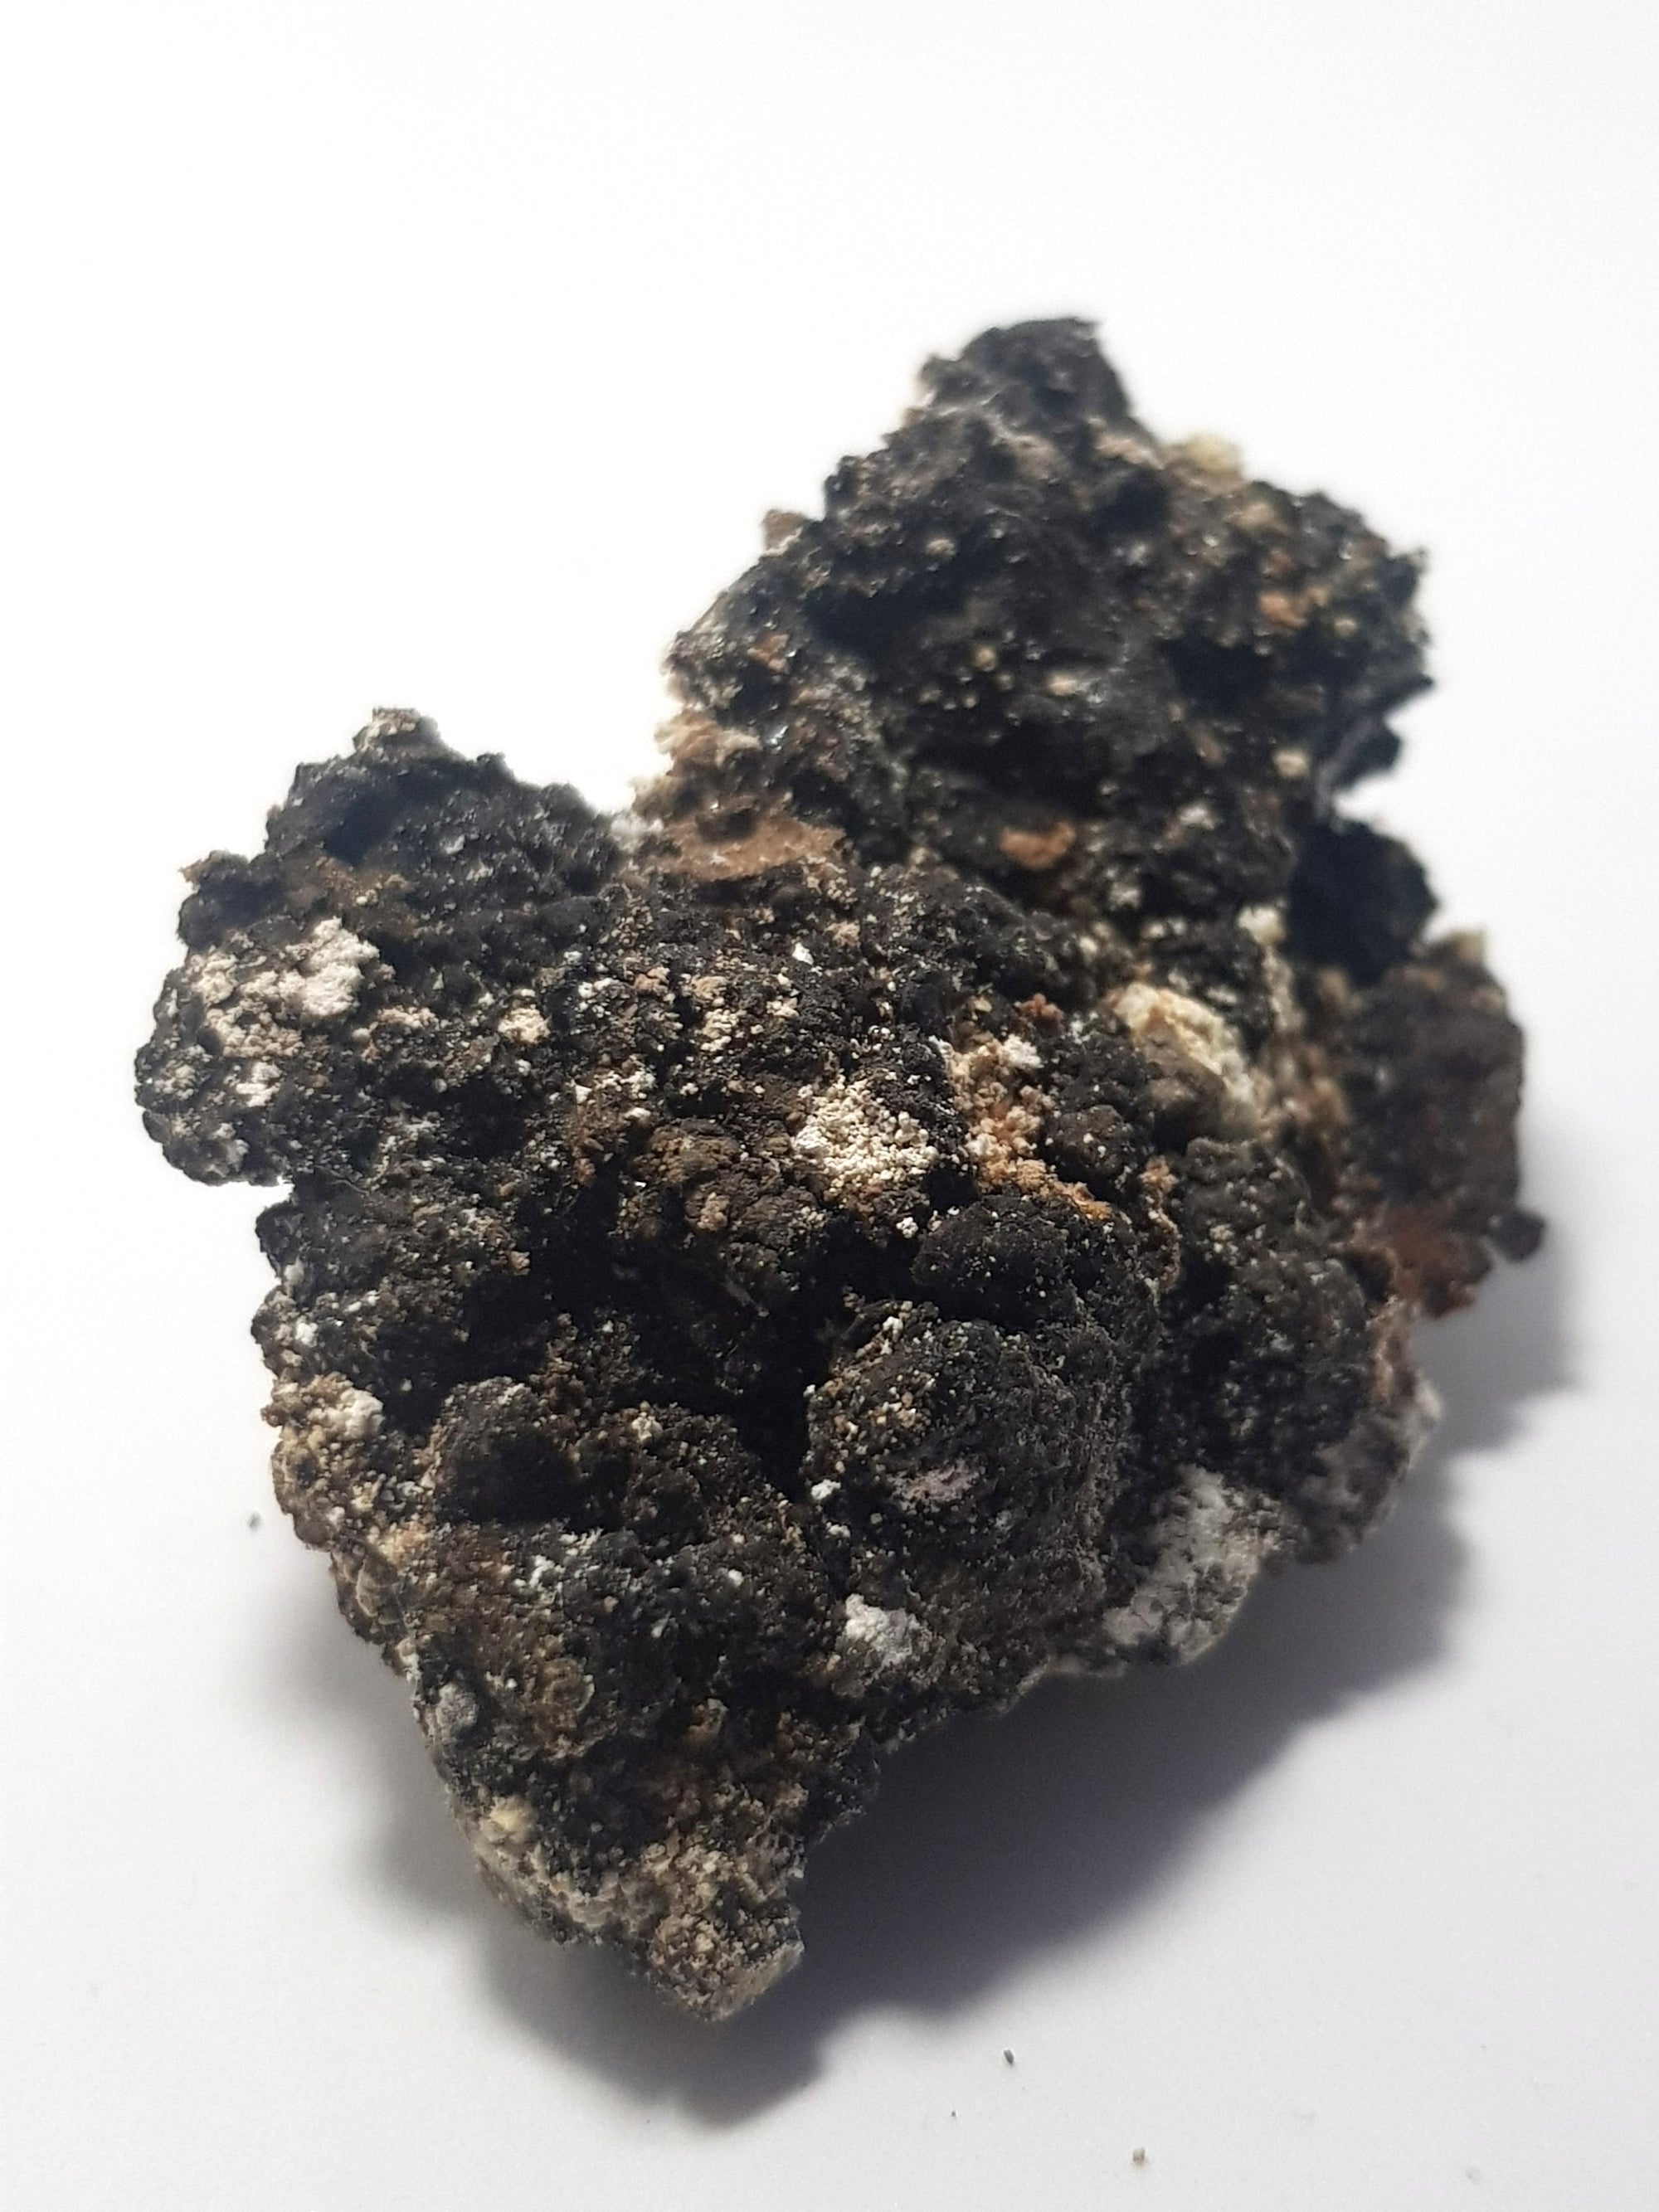 A sample of elaterite. The sample is irregularly shaped. The surface consists of black bubbles of illiterate as well as smaller sections of a white and orange material.